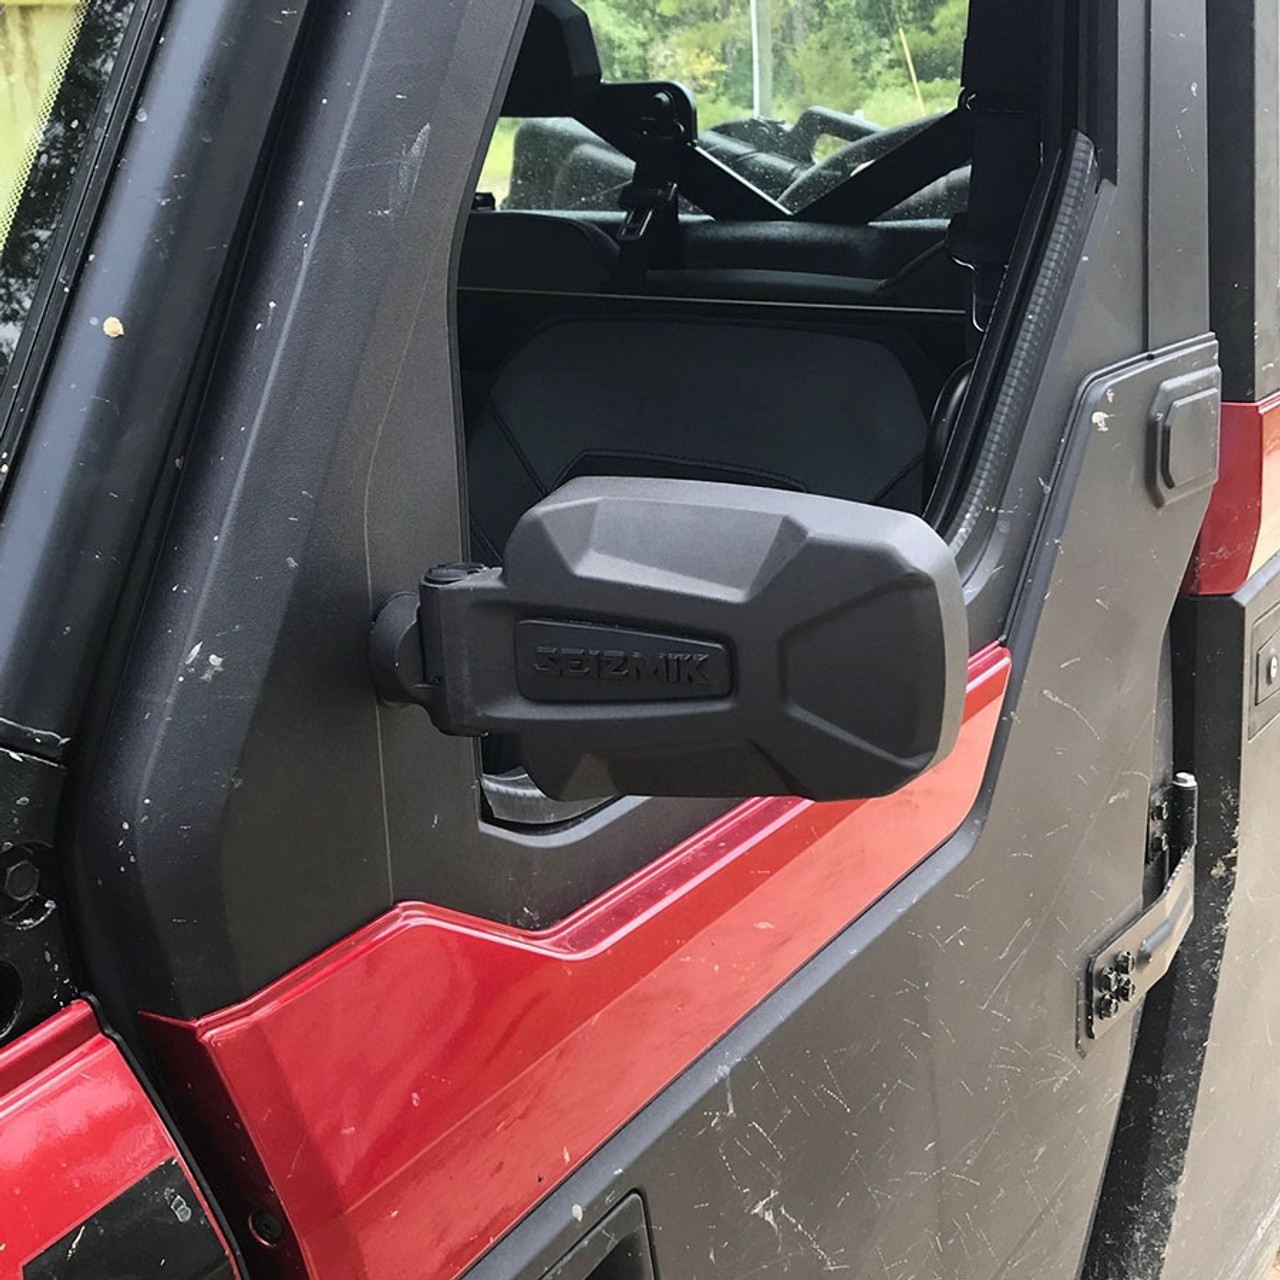 Polaris Ranger Pro-Fit Bars Side View Mirrors with Dual Mode LEDs by Seizmik